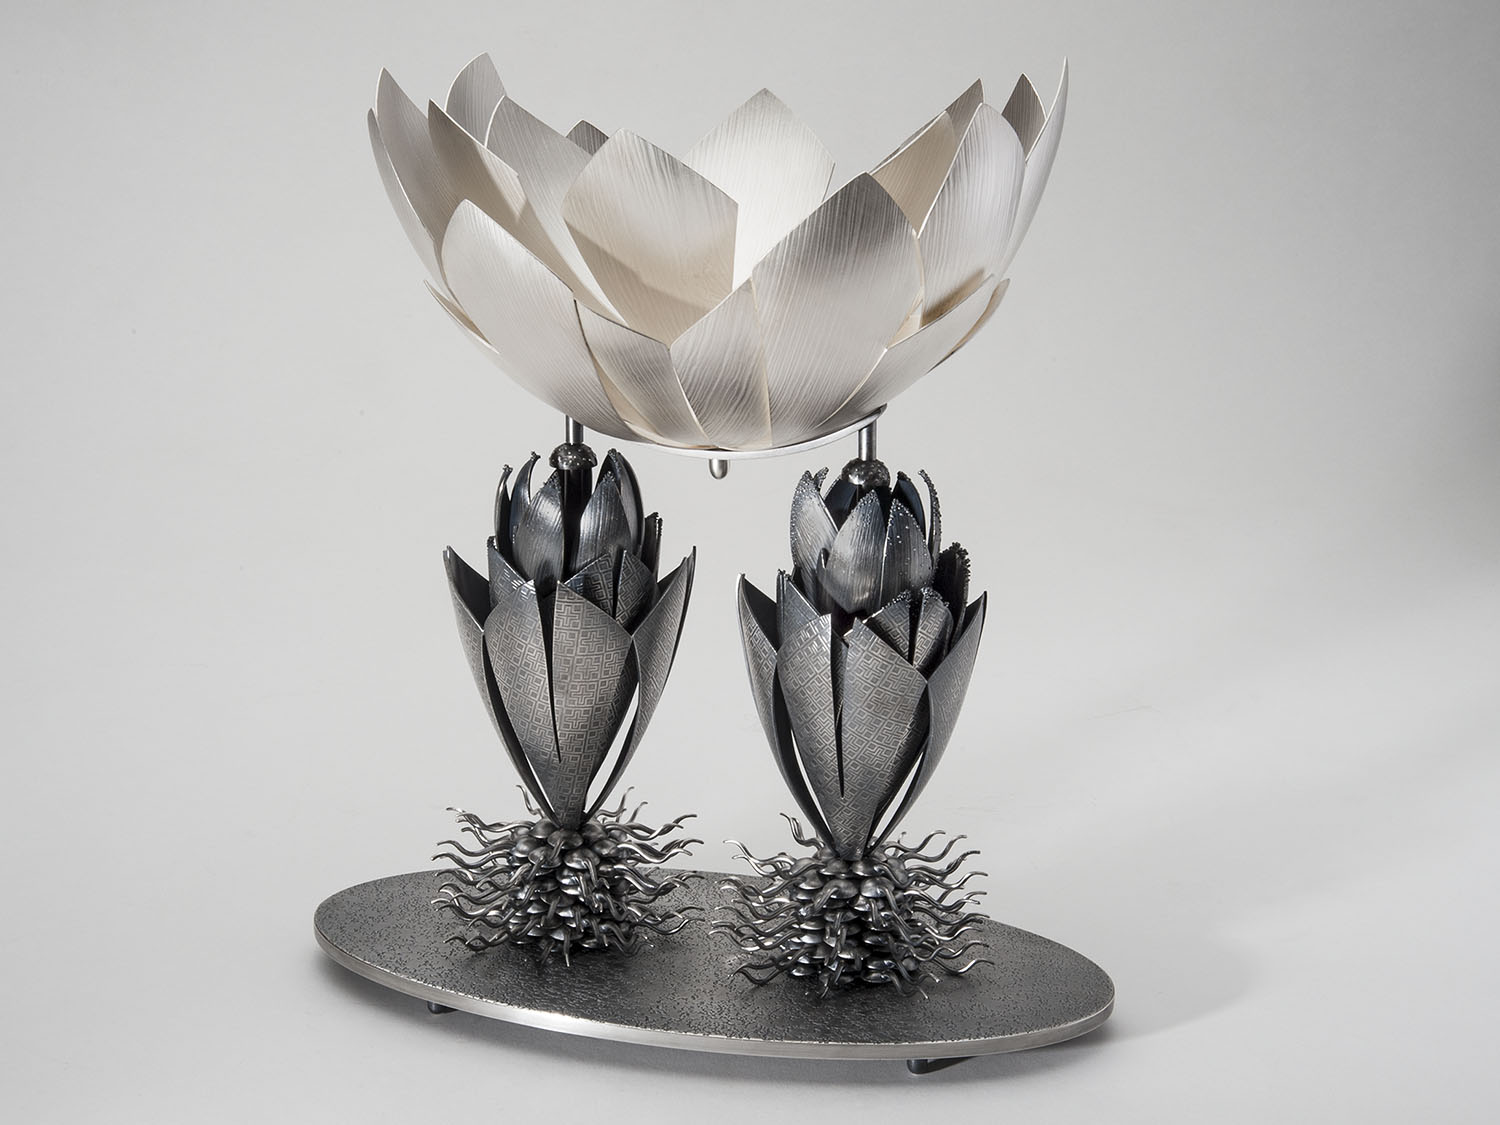 Corbeille  |  2015  |  sterling silver, bronze, silver plate  |  13.5 x 9 x 9 inches